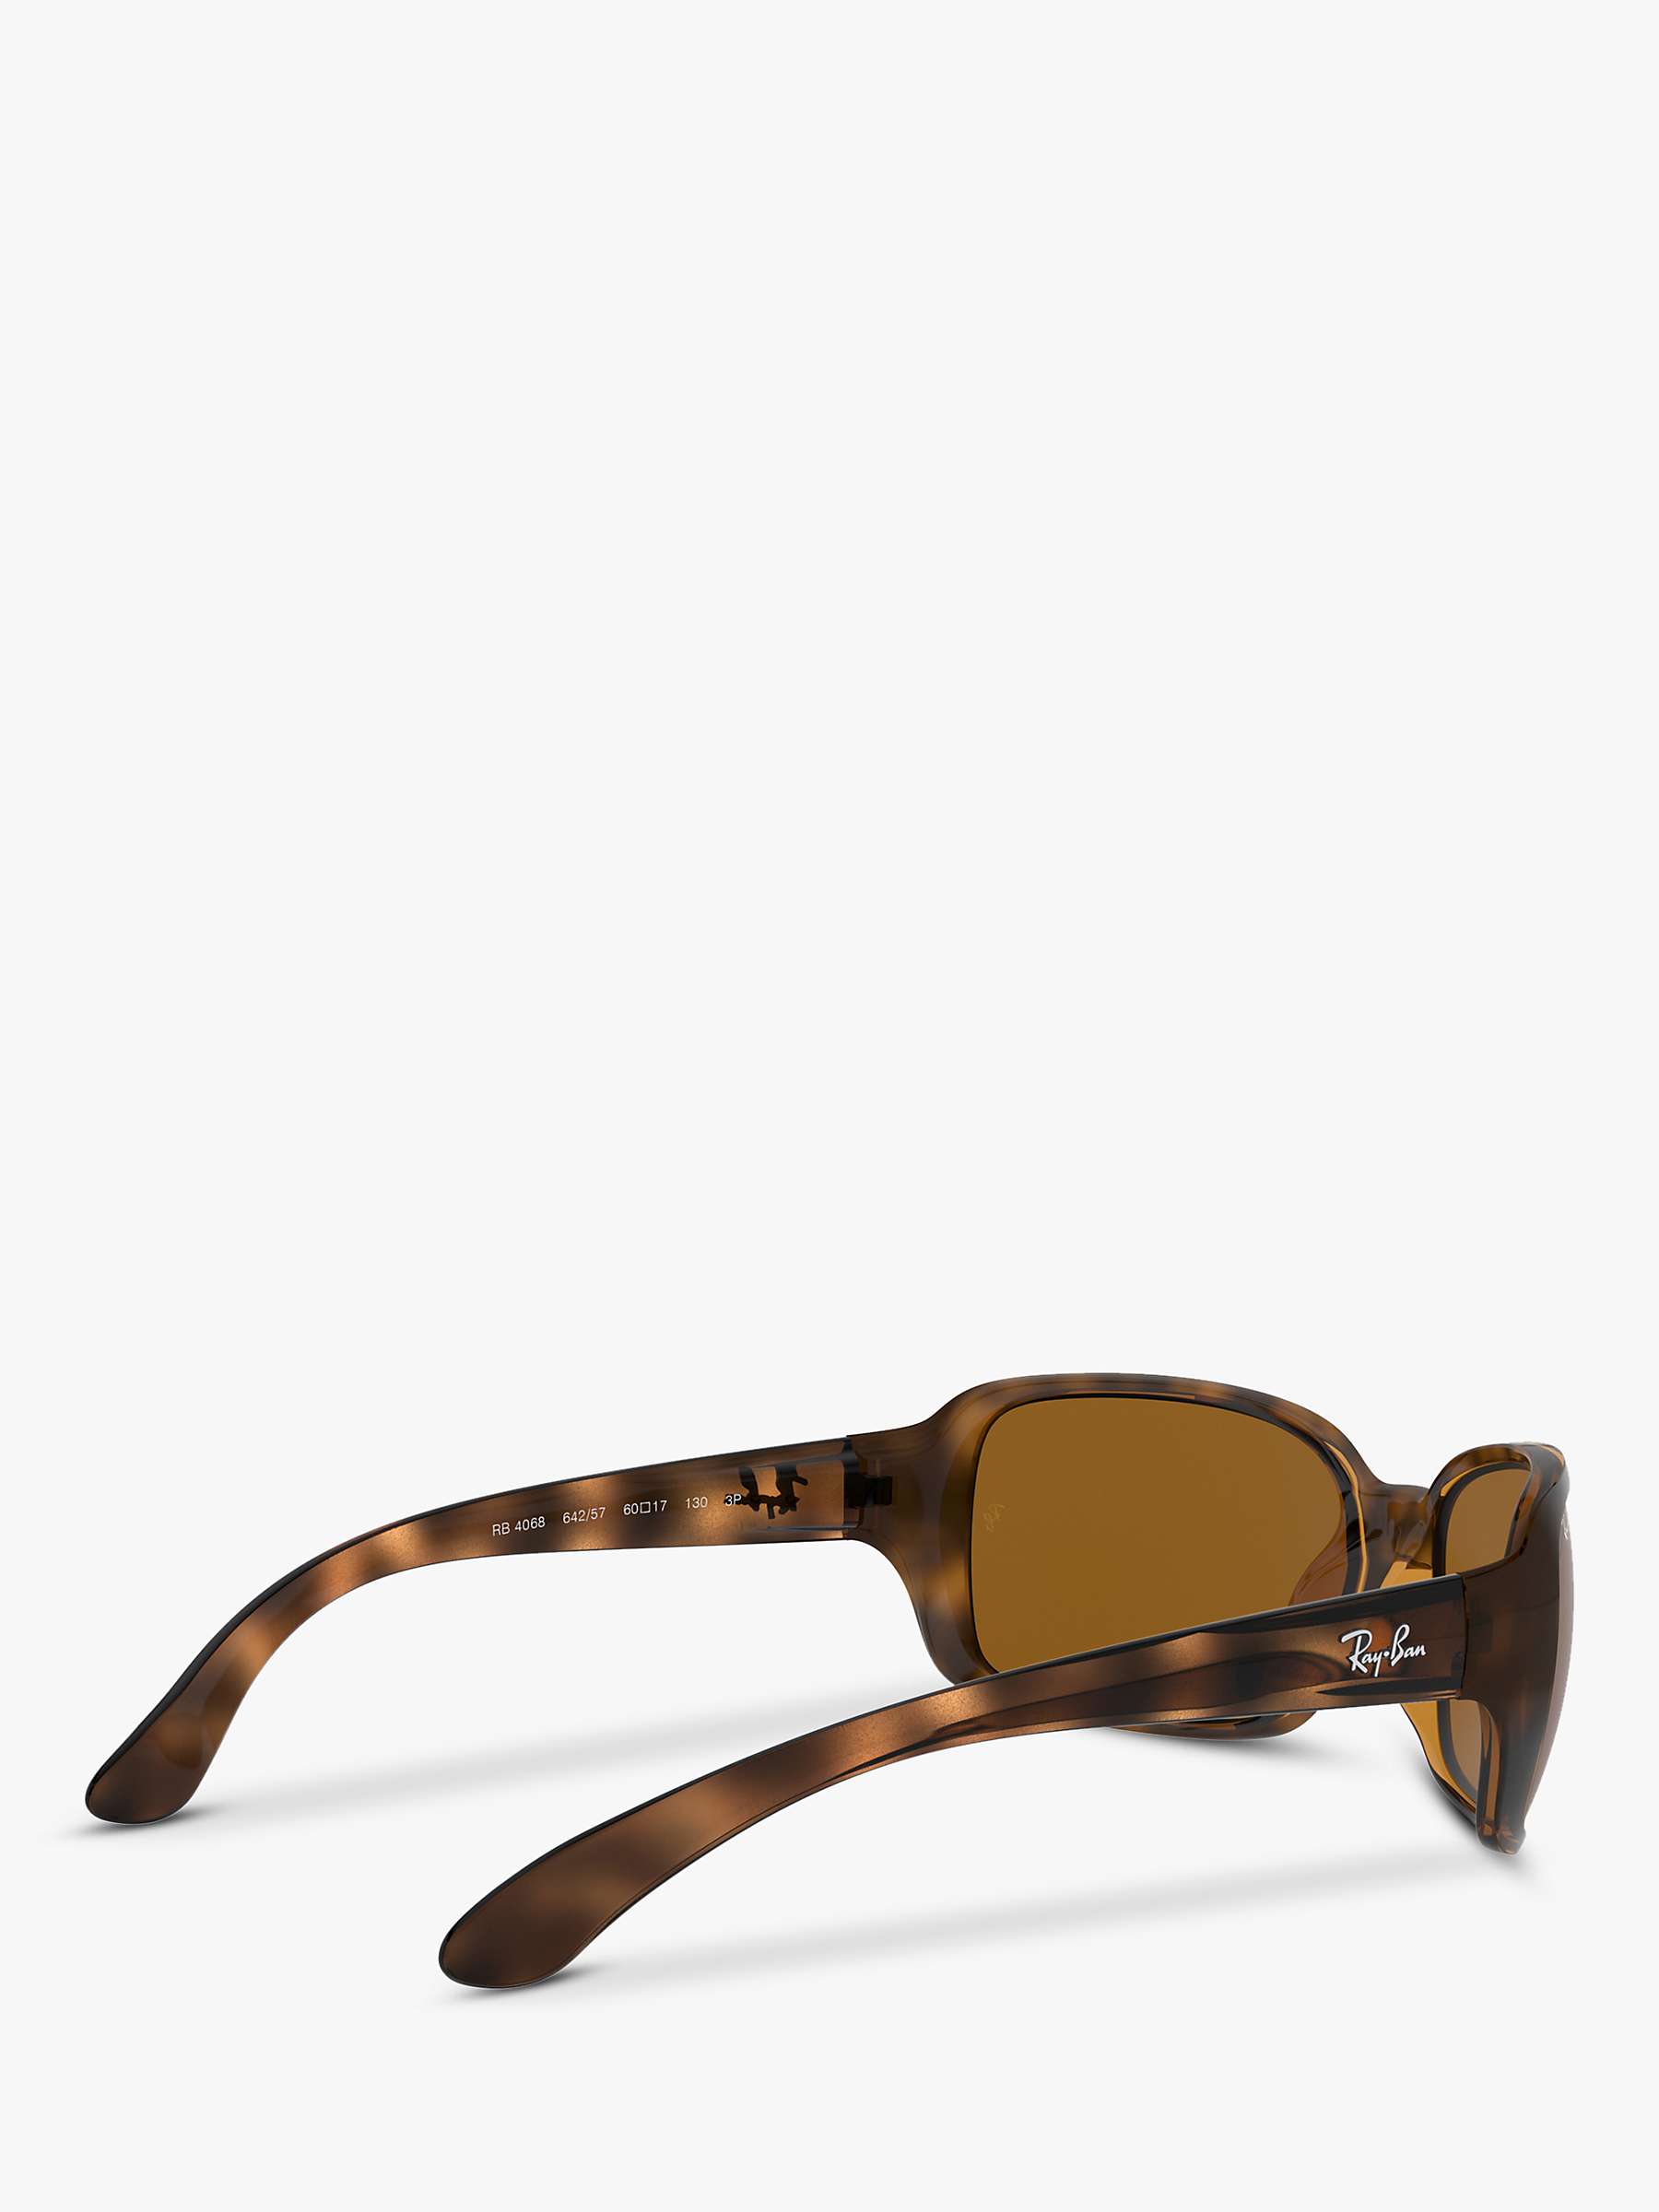 Buy Ray-Ban RB4068 Oversized Square Sunglasses, Havana Online at johnlewis.com